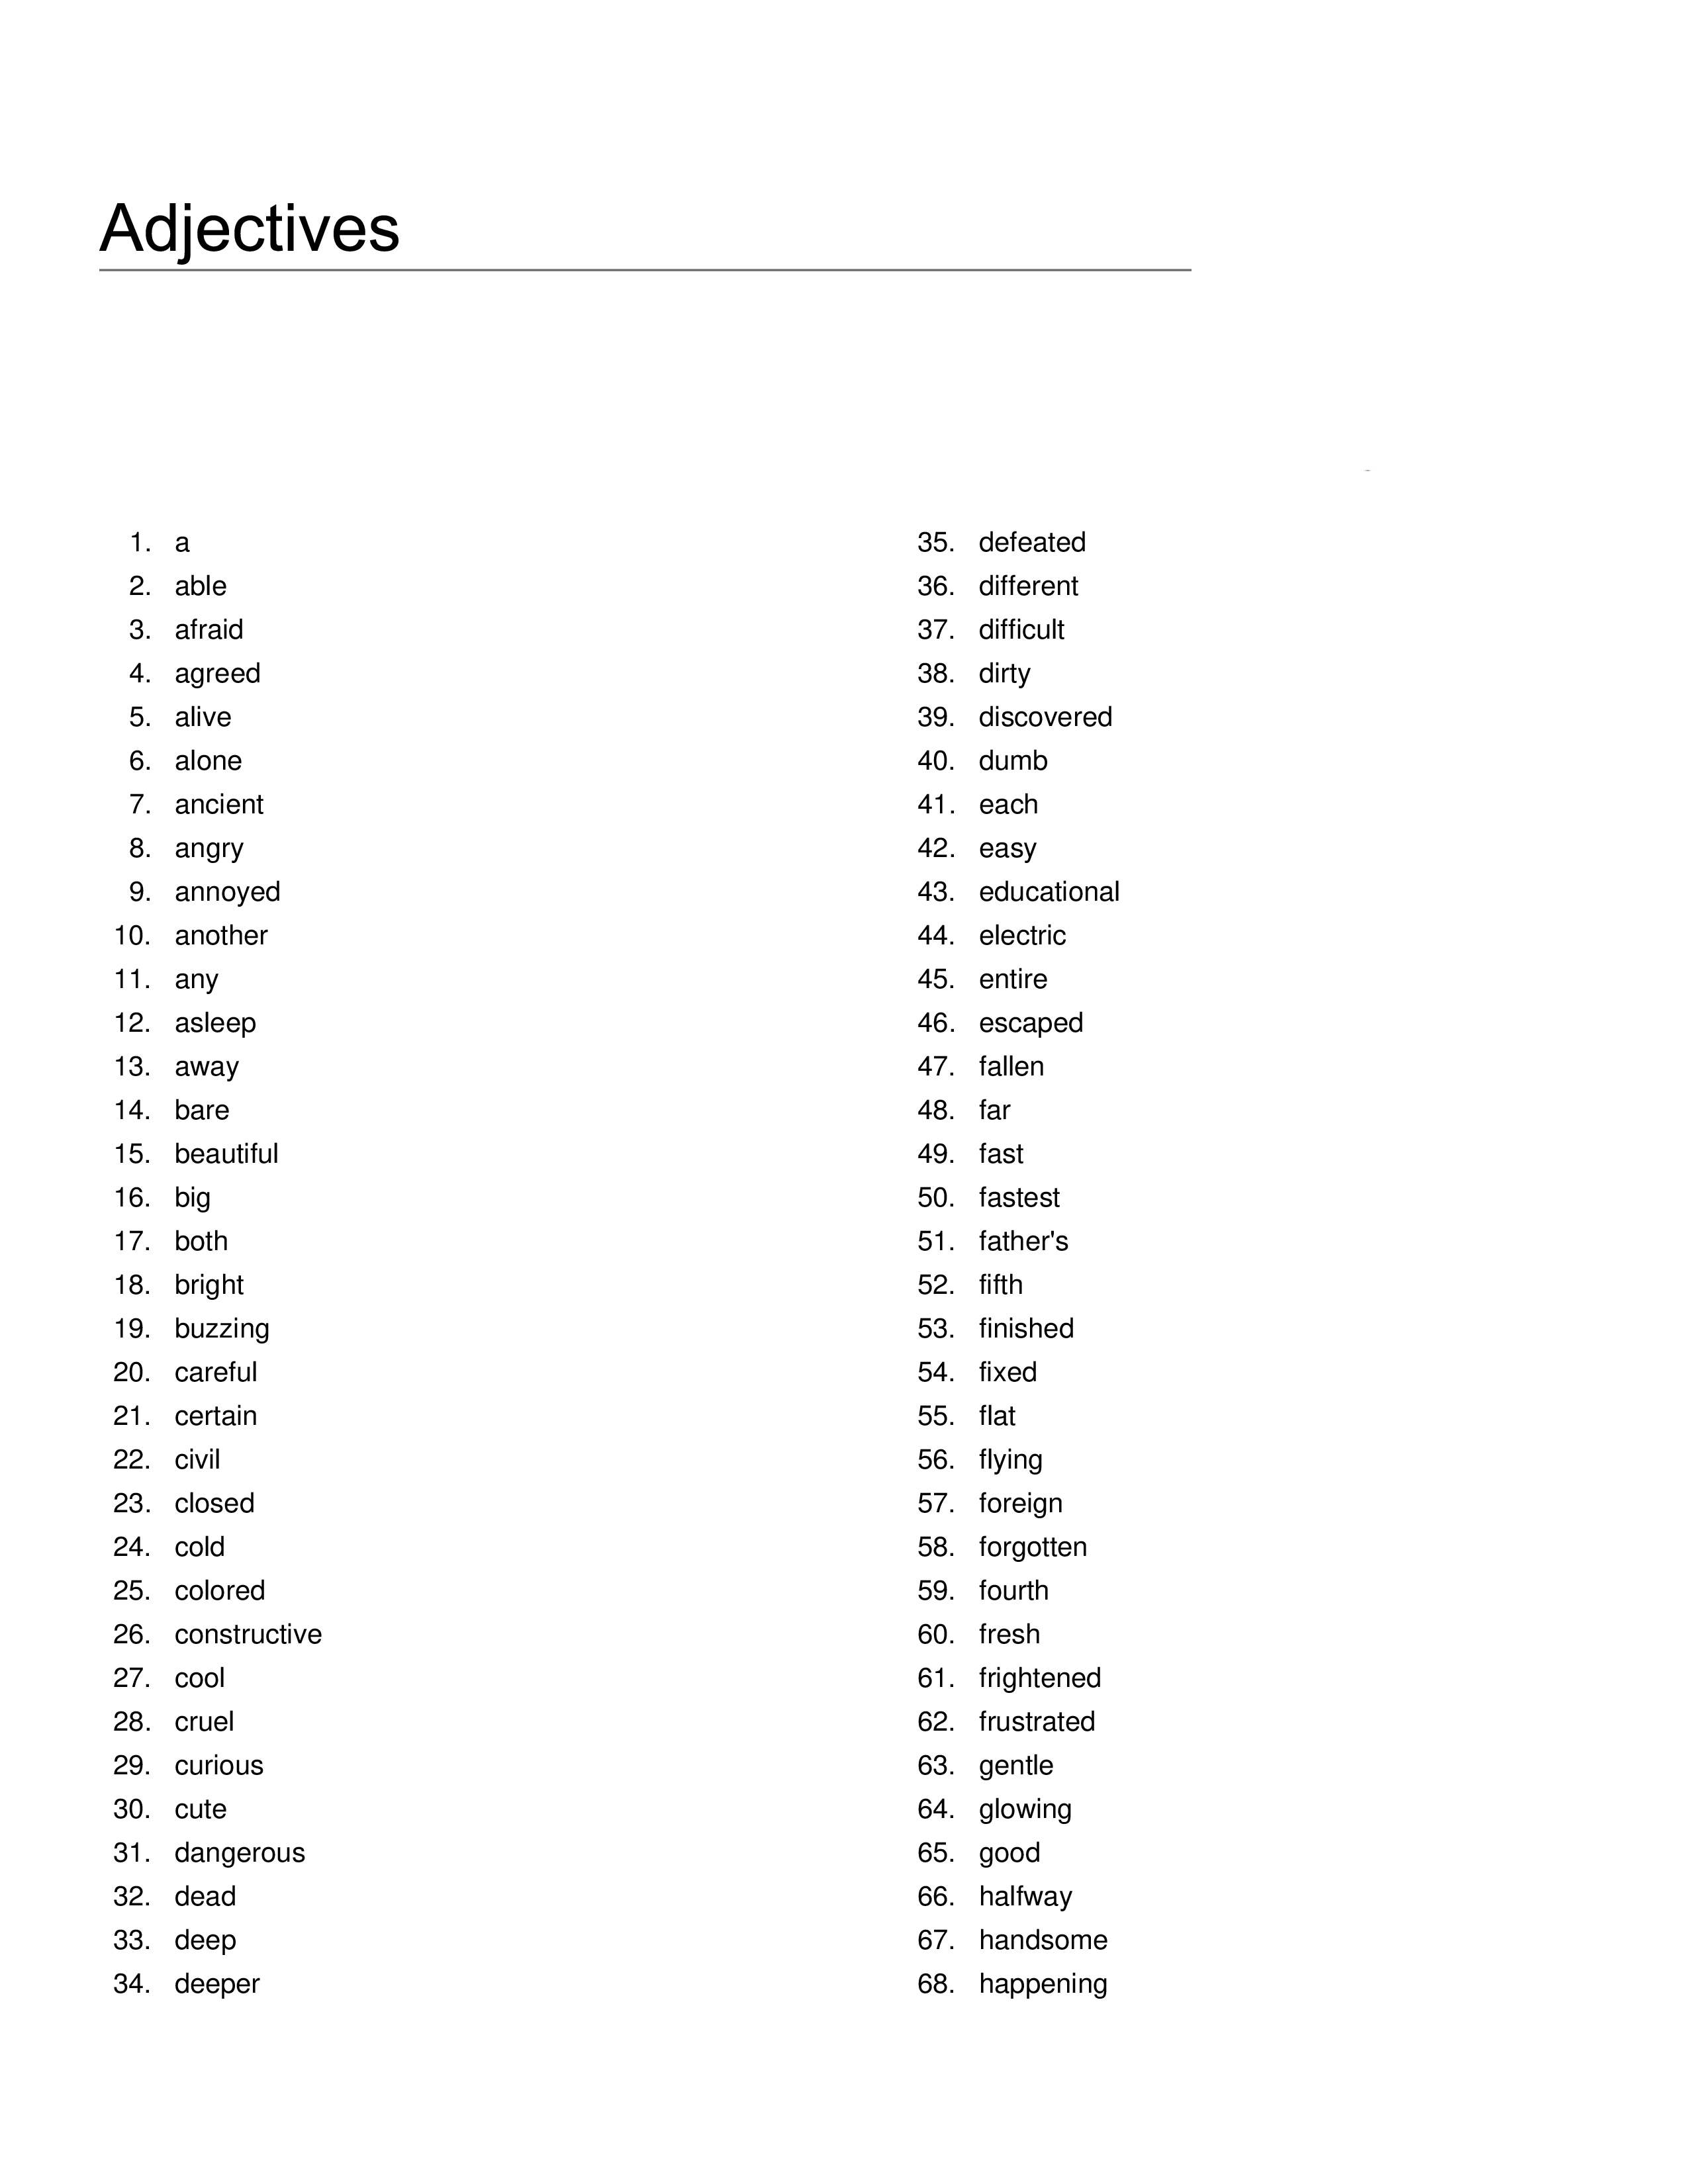 List of Adjectives main image